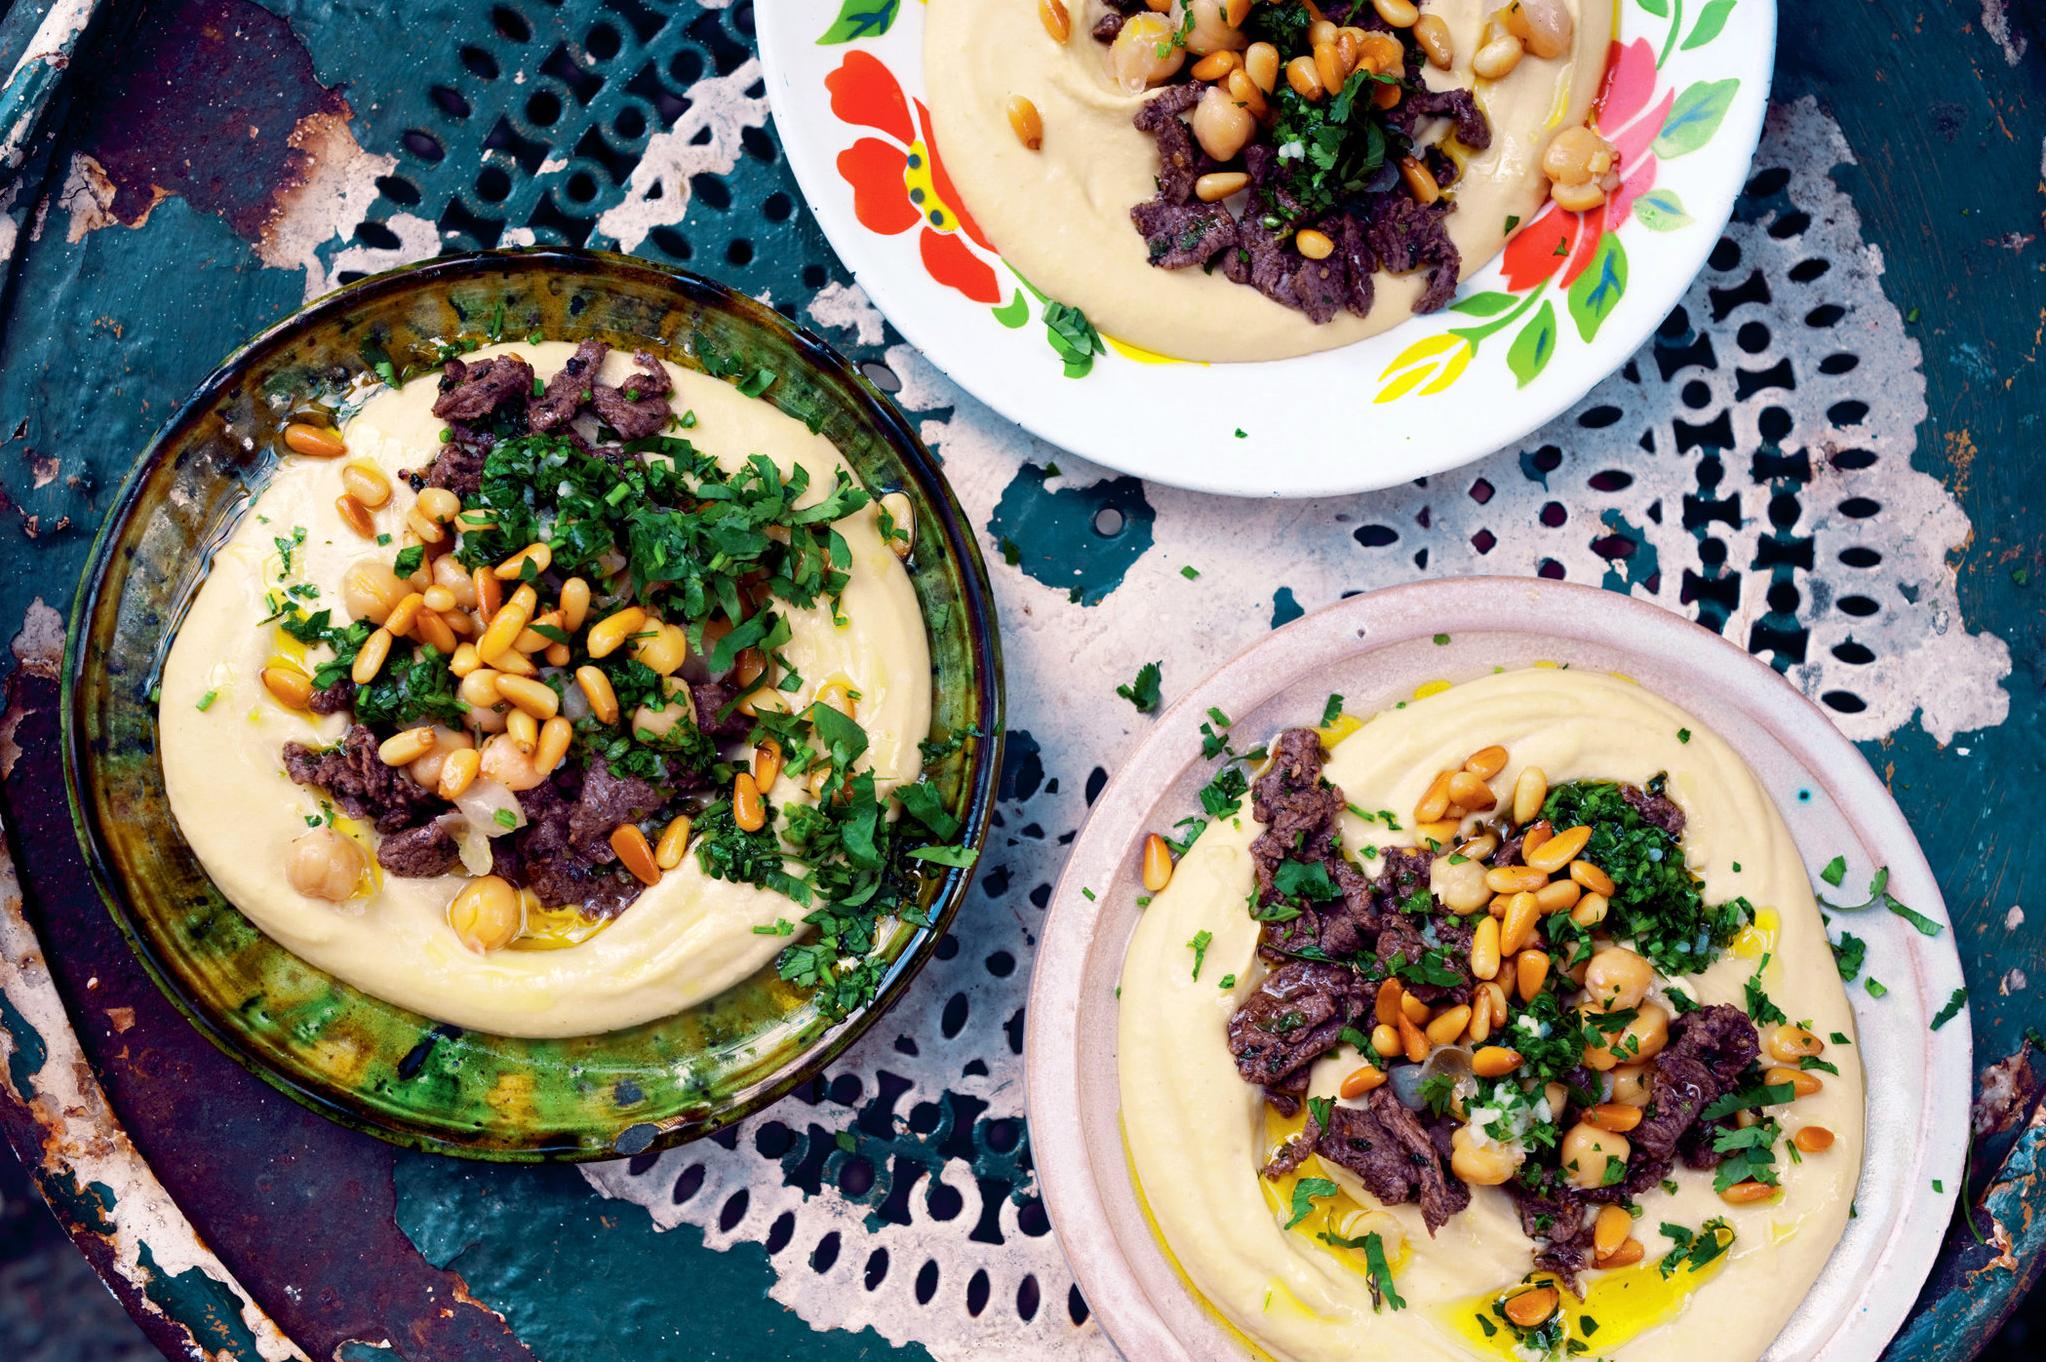  Soft and fluffy pita bread served alongside homemade hummus is the perfect combination.